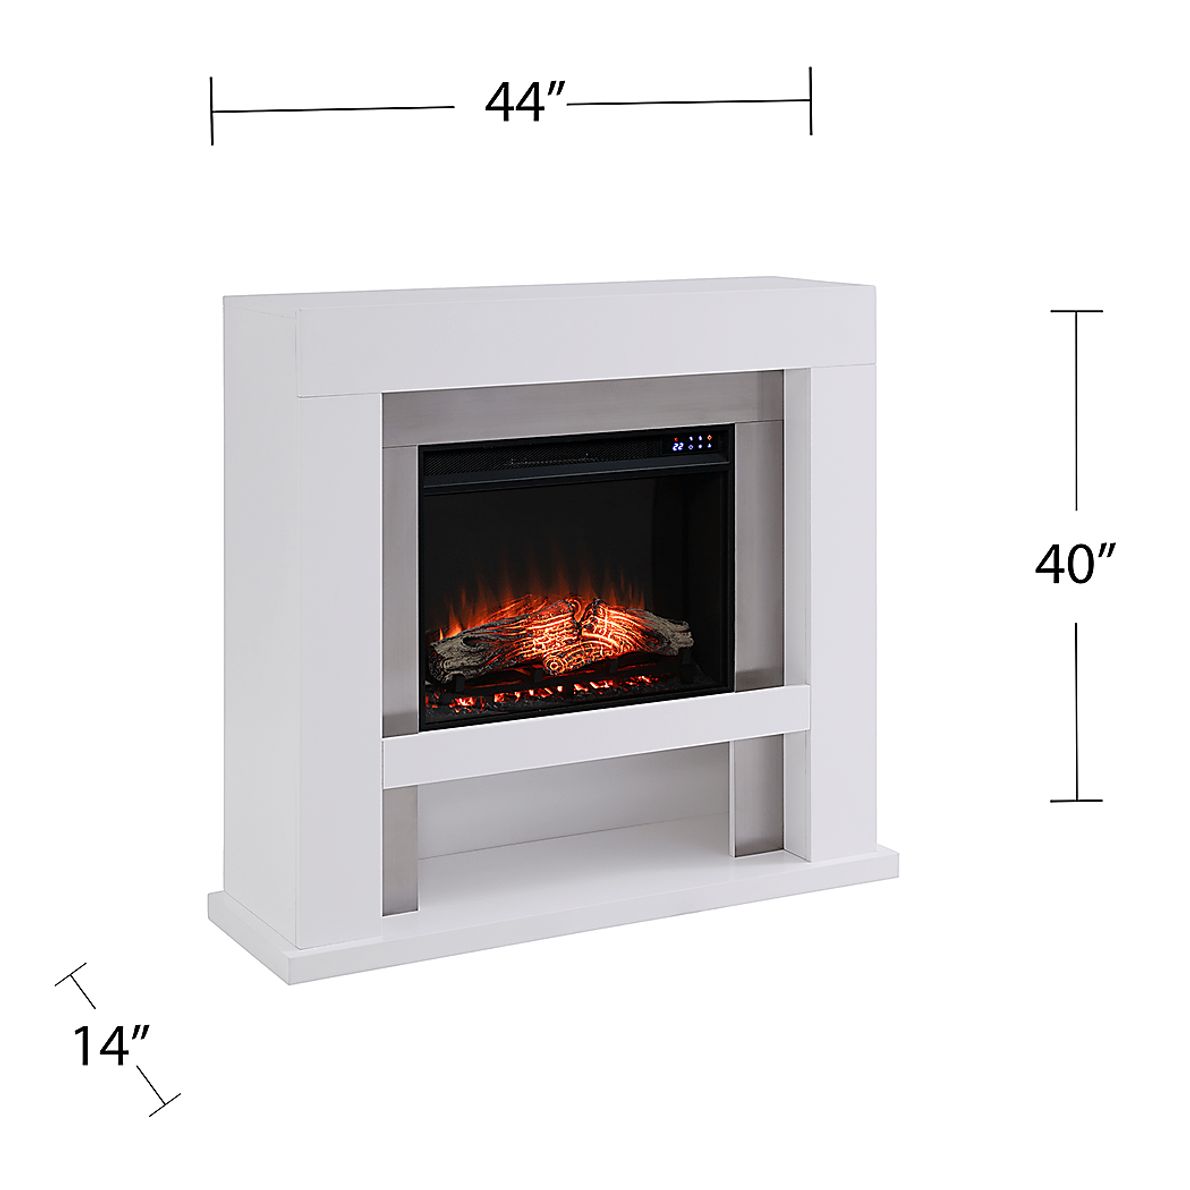 Linkmeadow IV White 44 in. Console With Touch Panel Electric Fireplace